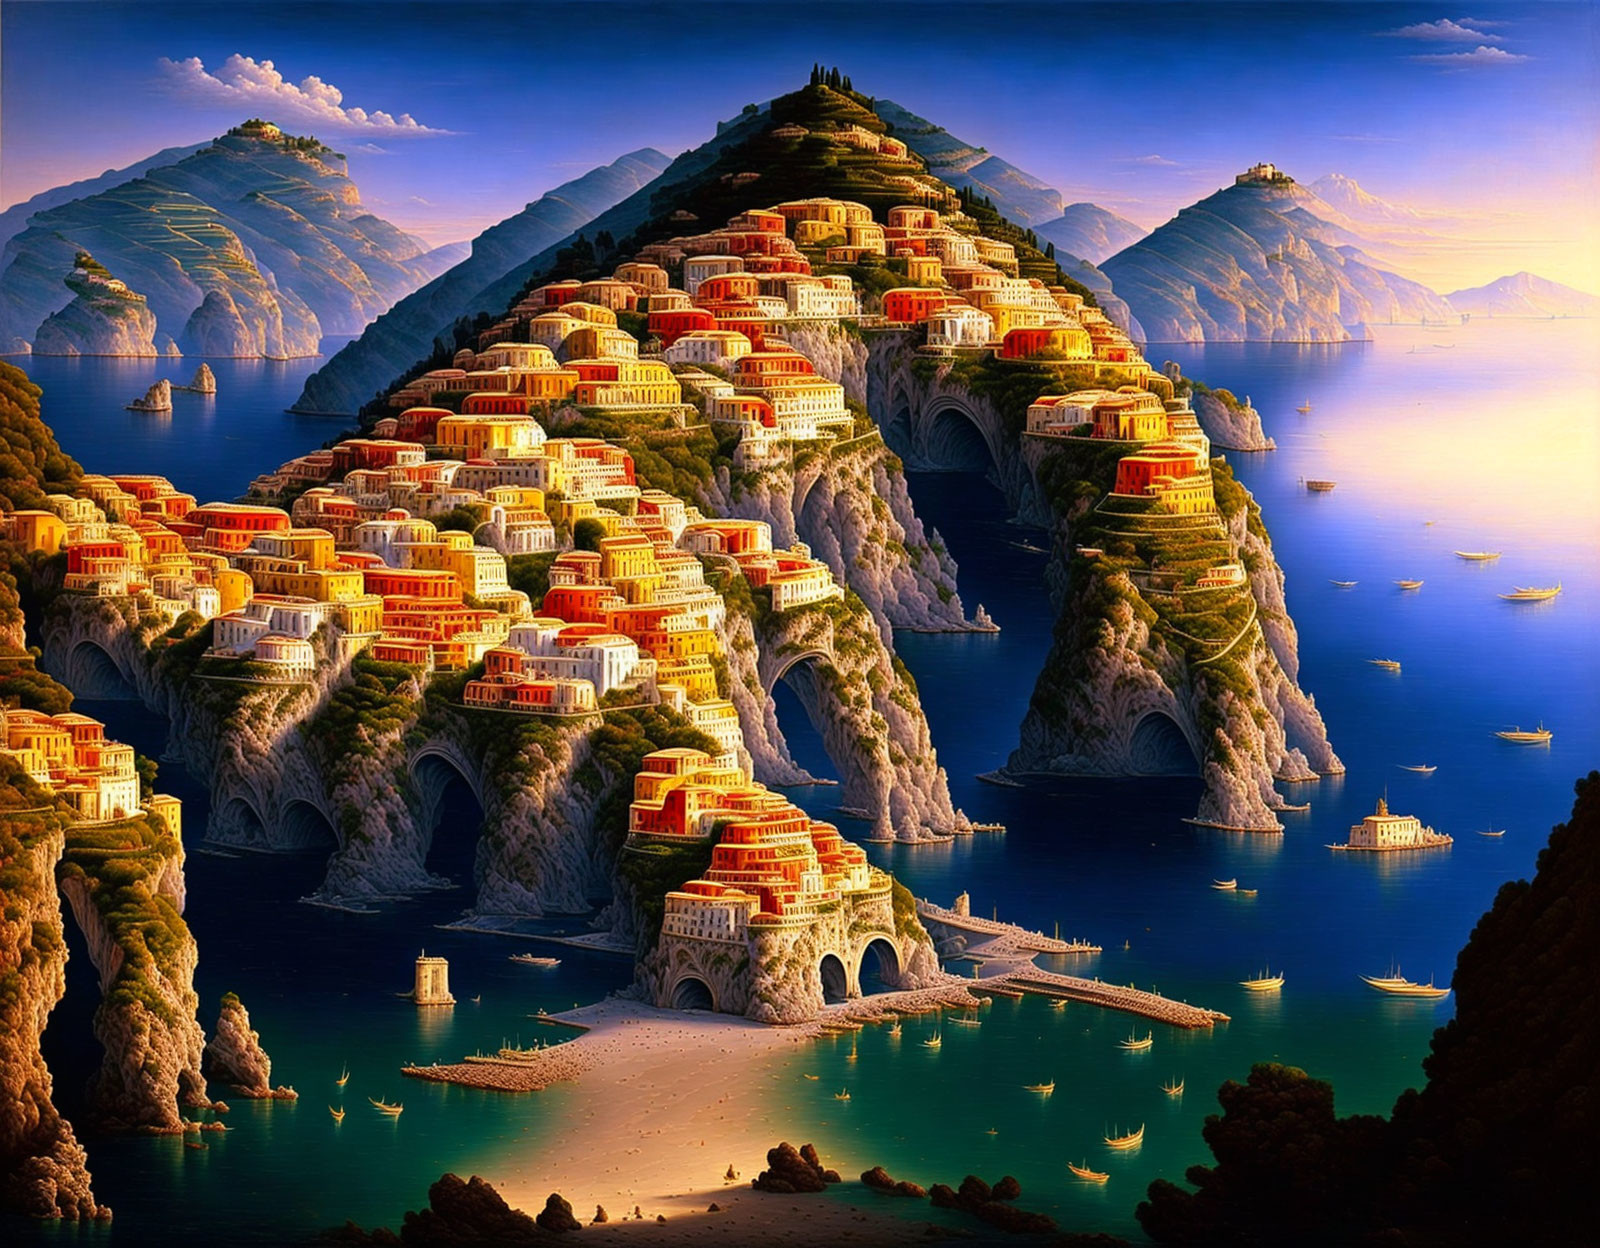 Coastal terraced city with vibrant orange roofs on cliffs by calm blue waters